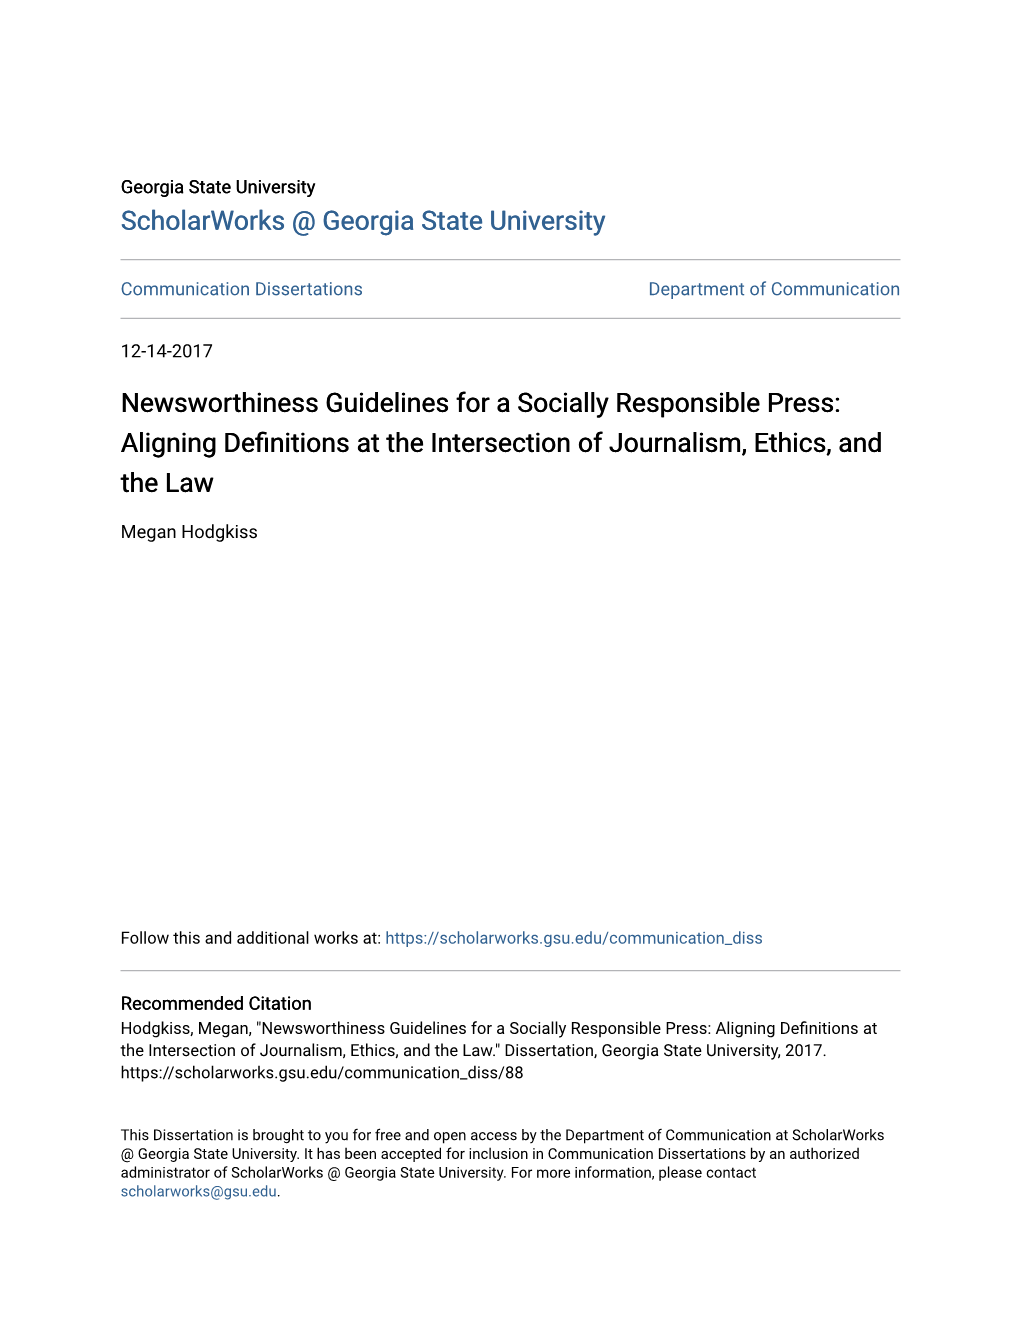 Aligning Definitions at the Intersection of Journalism, Ethics, and the Law